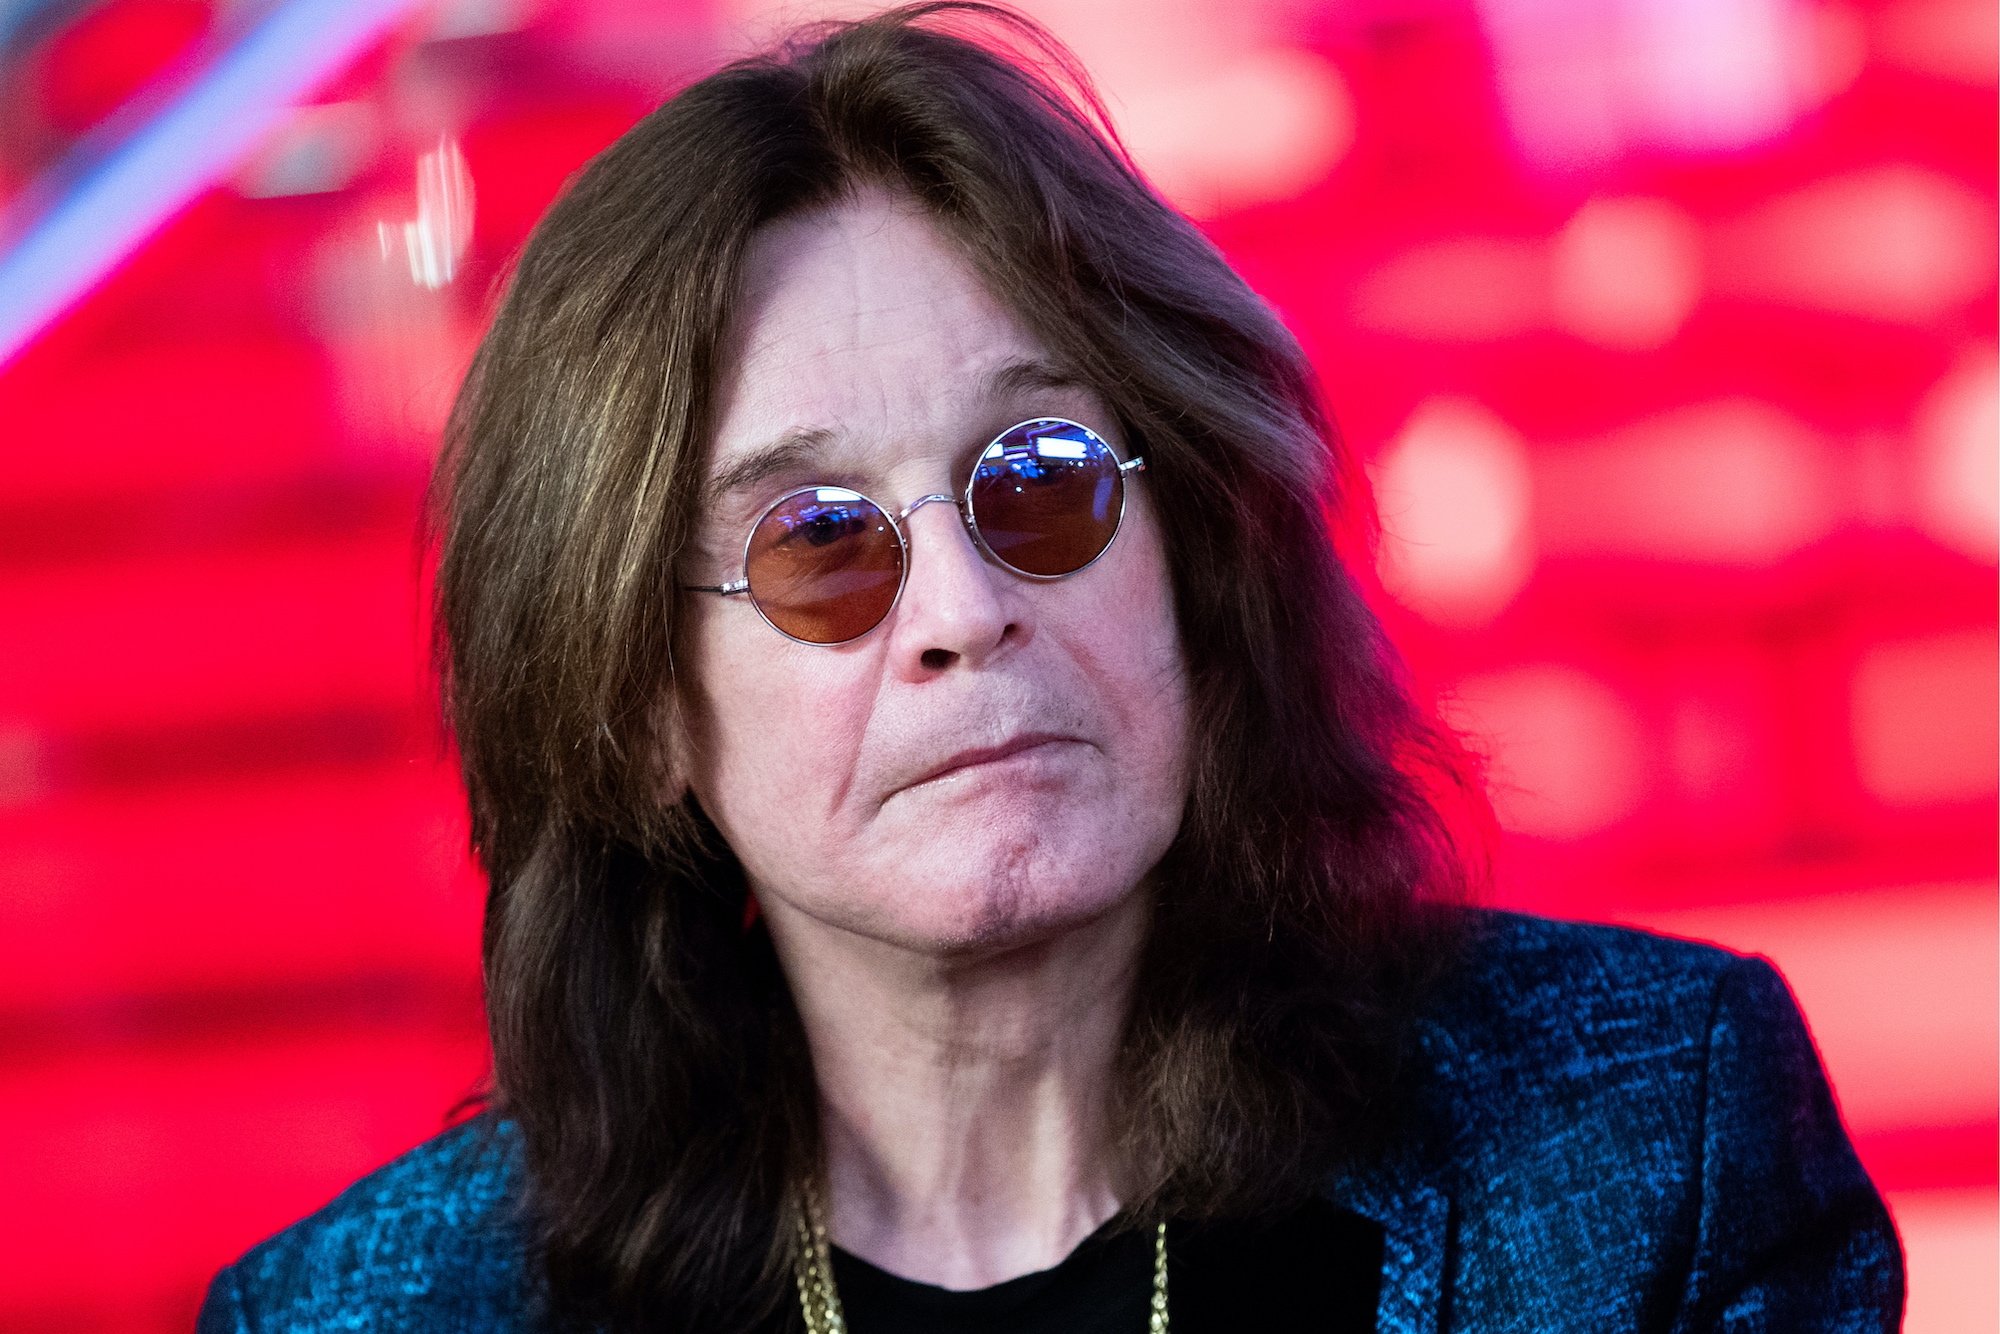 Ozzy Osbourne in front of a red background